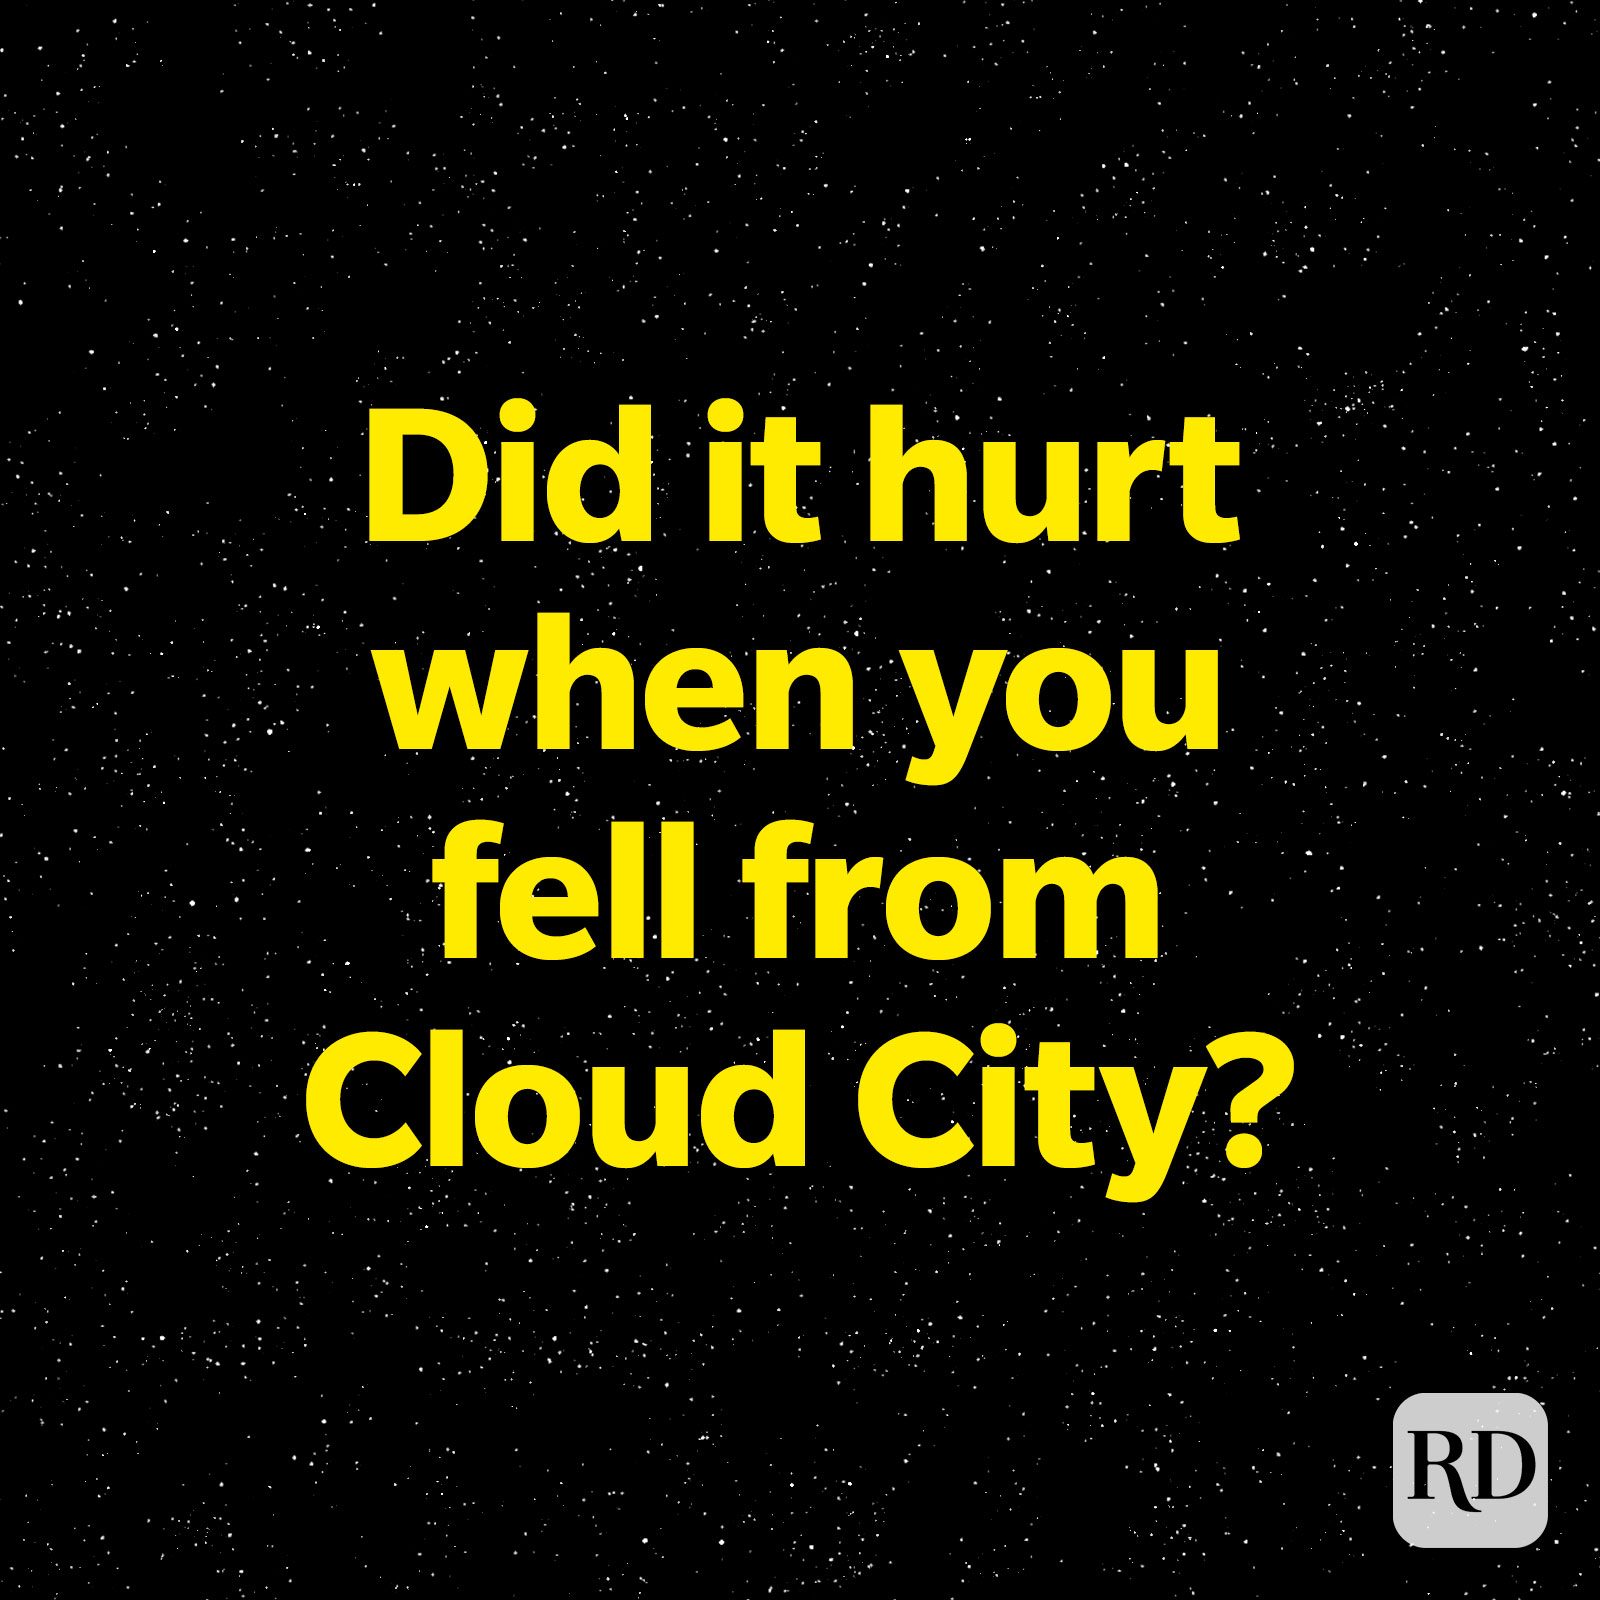 Did It Hurt When You Fell From Cloud City star wars pun